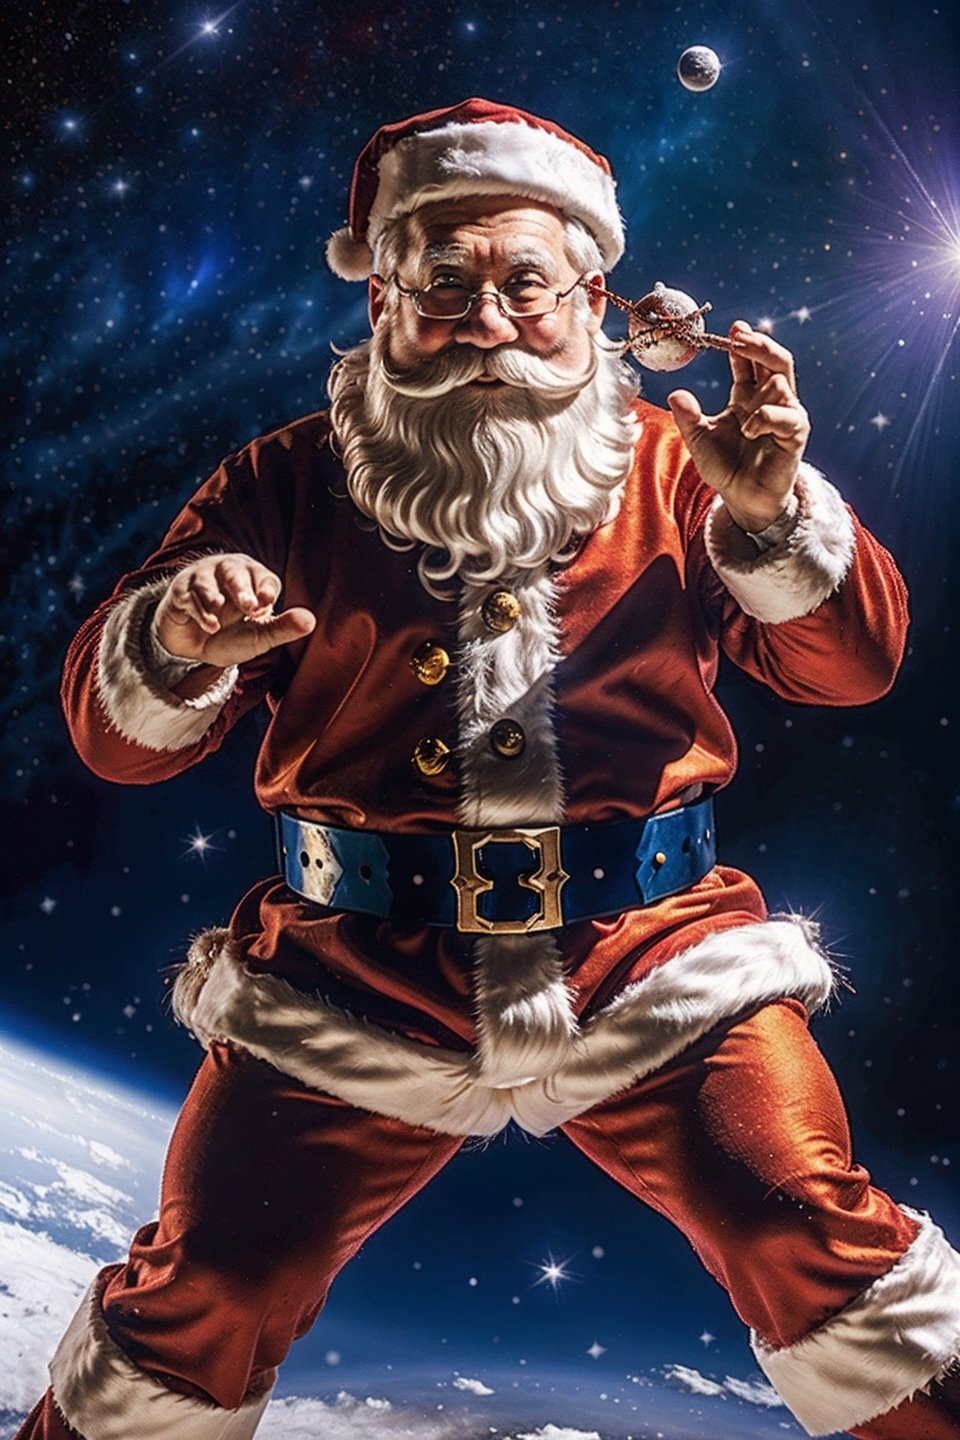 snowing:1.2, sparkling star, moon, clouds, detailed (Santa Claus, flying, in space, hands hips:1.3)

high resolution,natural lighting setup,masterpiece,(magical place:1.4),High resolution,(nsfw), (looking_at_viewer:1.3), ho-ho-ho smile,Masterpiece